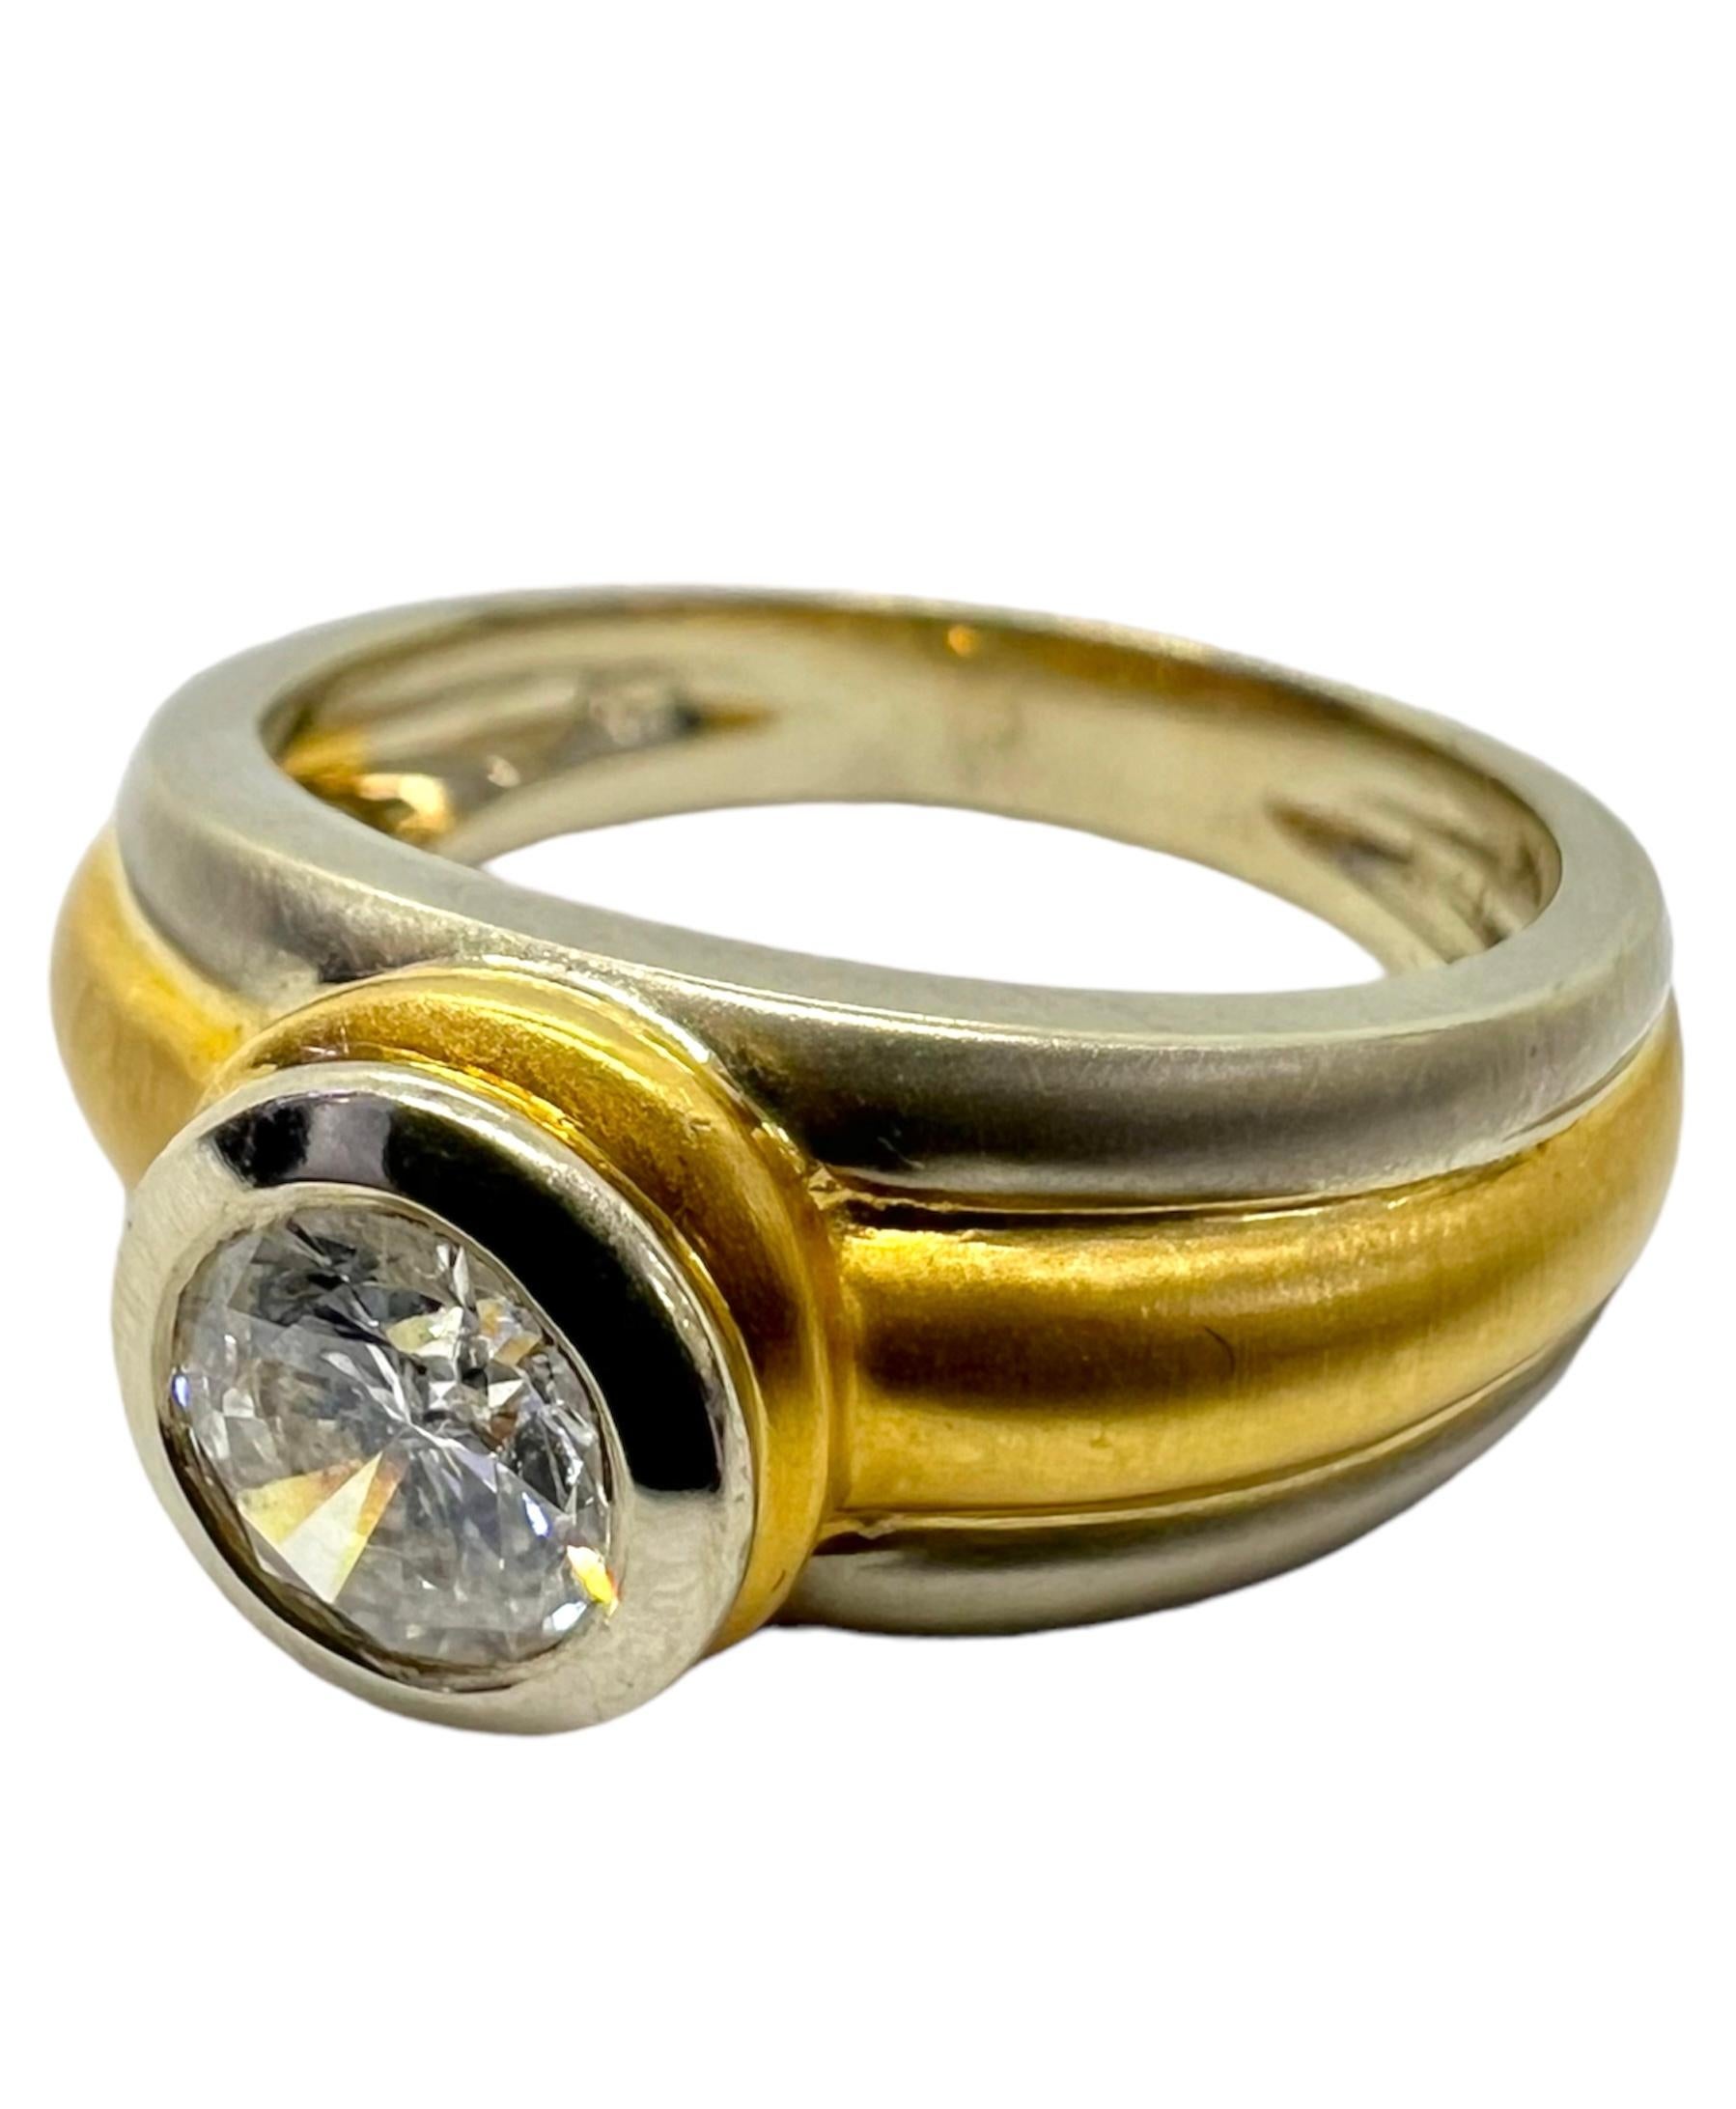 18K yellow gold ring with center round diamond.

Sophia D by Joseph Dardashti LTD has been known worldwide for 35 years and are inspired by classic Art Deco design that merges with modern manufacturing techniques.  